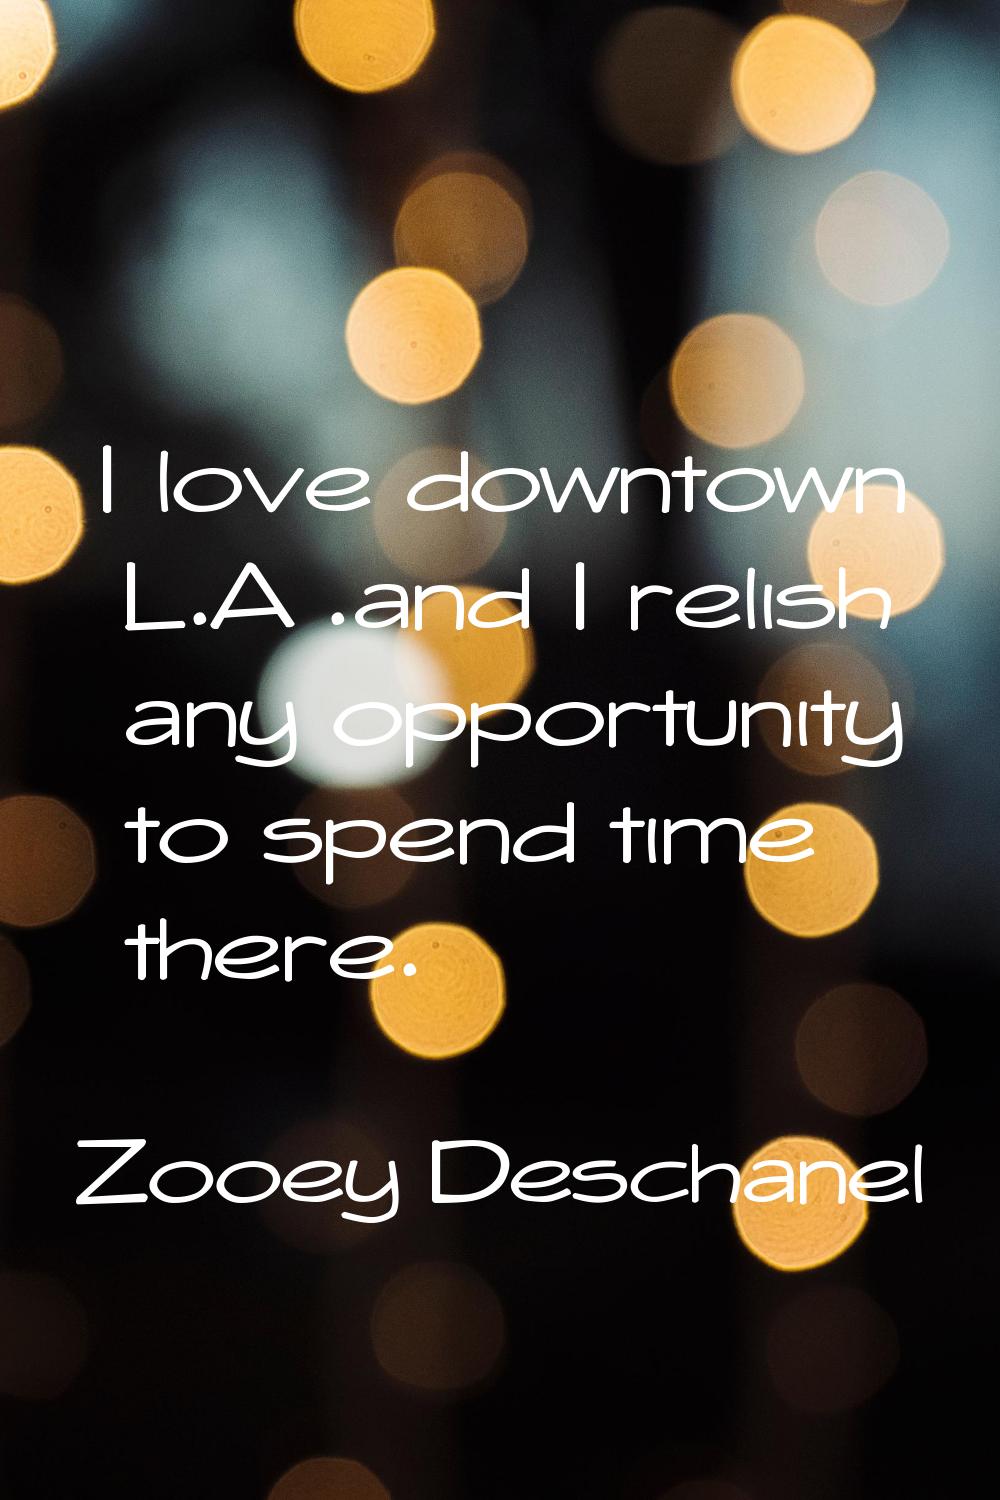 I love downtown L.A .and I relish any opportunity to spend time there.